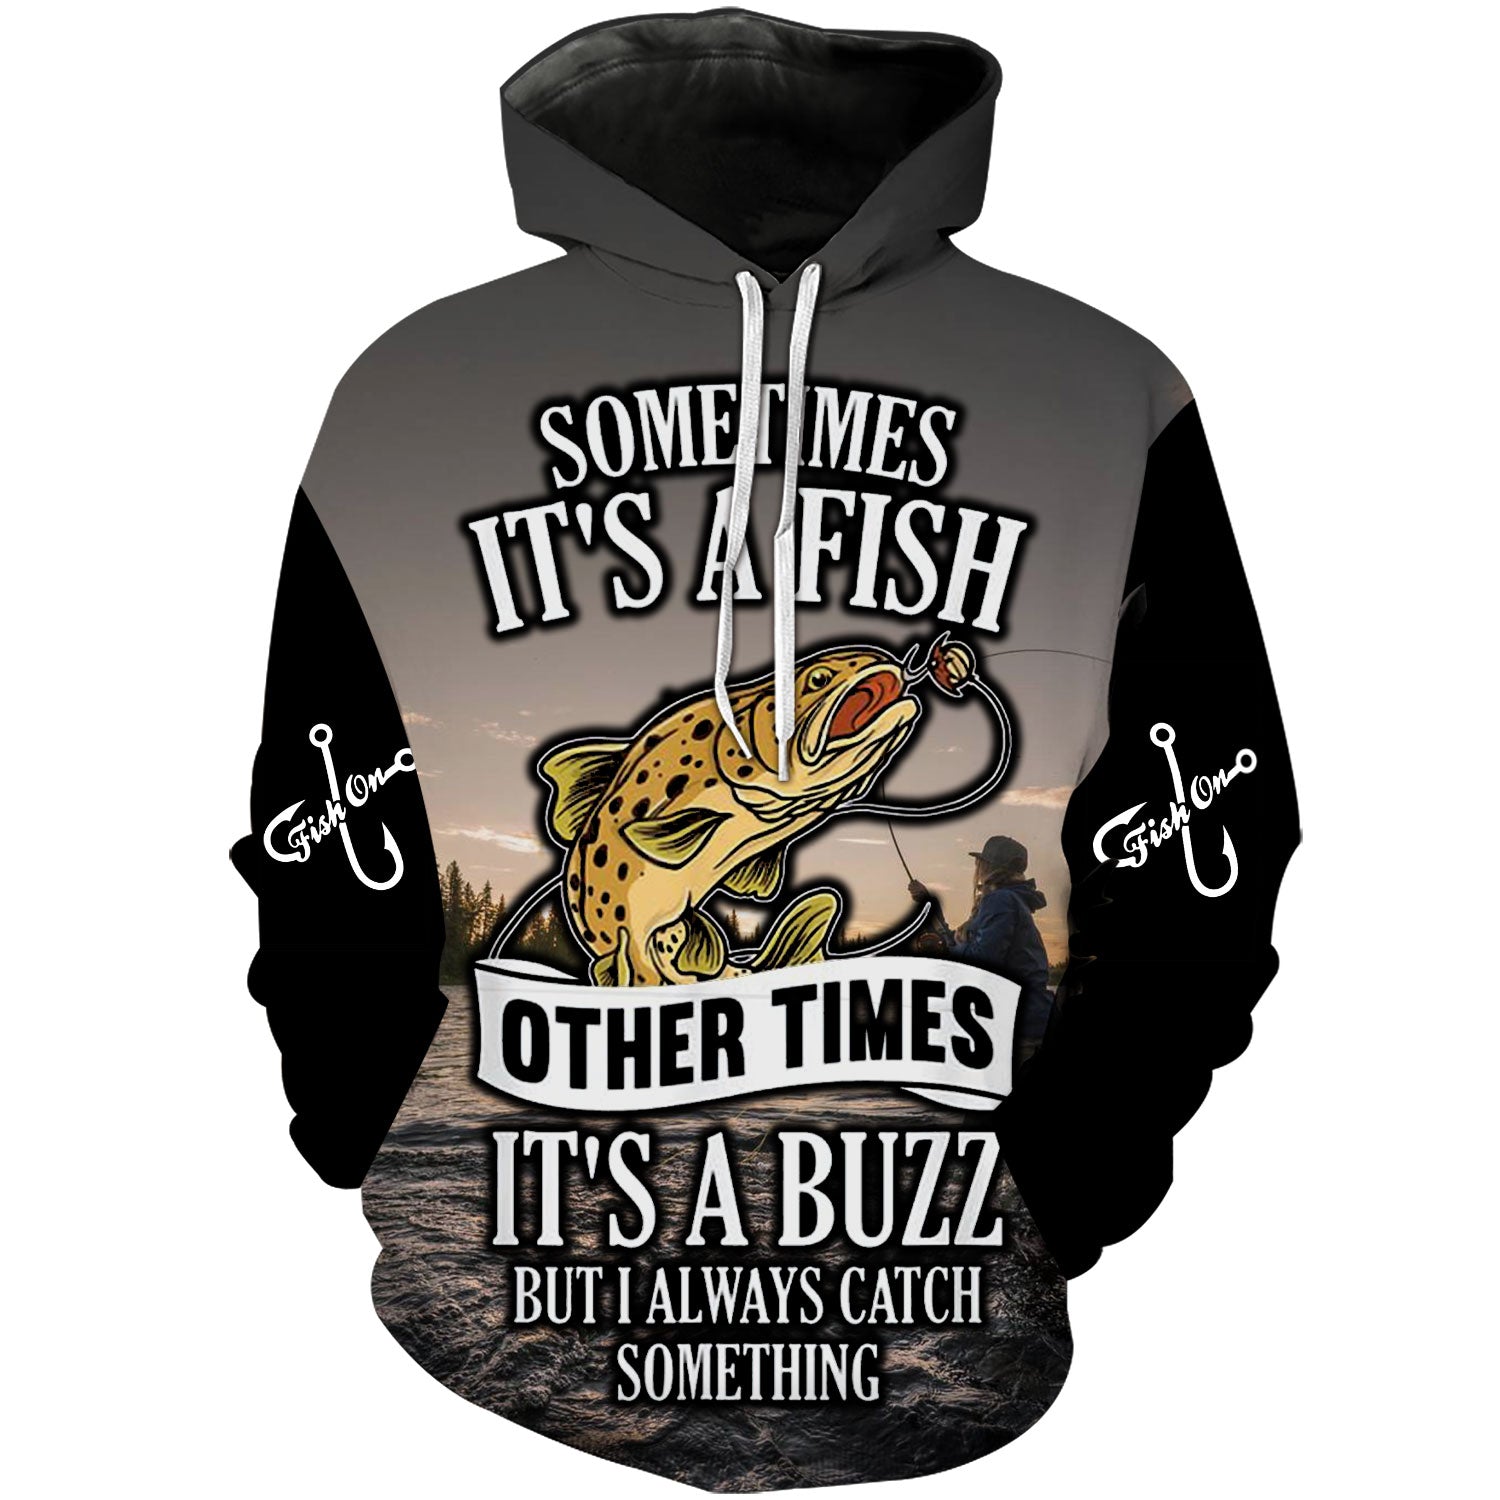 Sometimes it's a fish other times it's a buzz but I always catch something - Hoodie